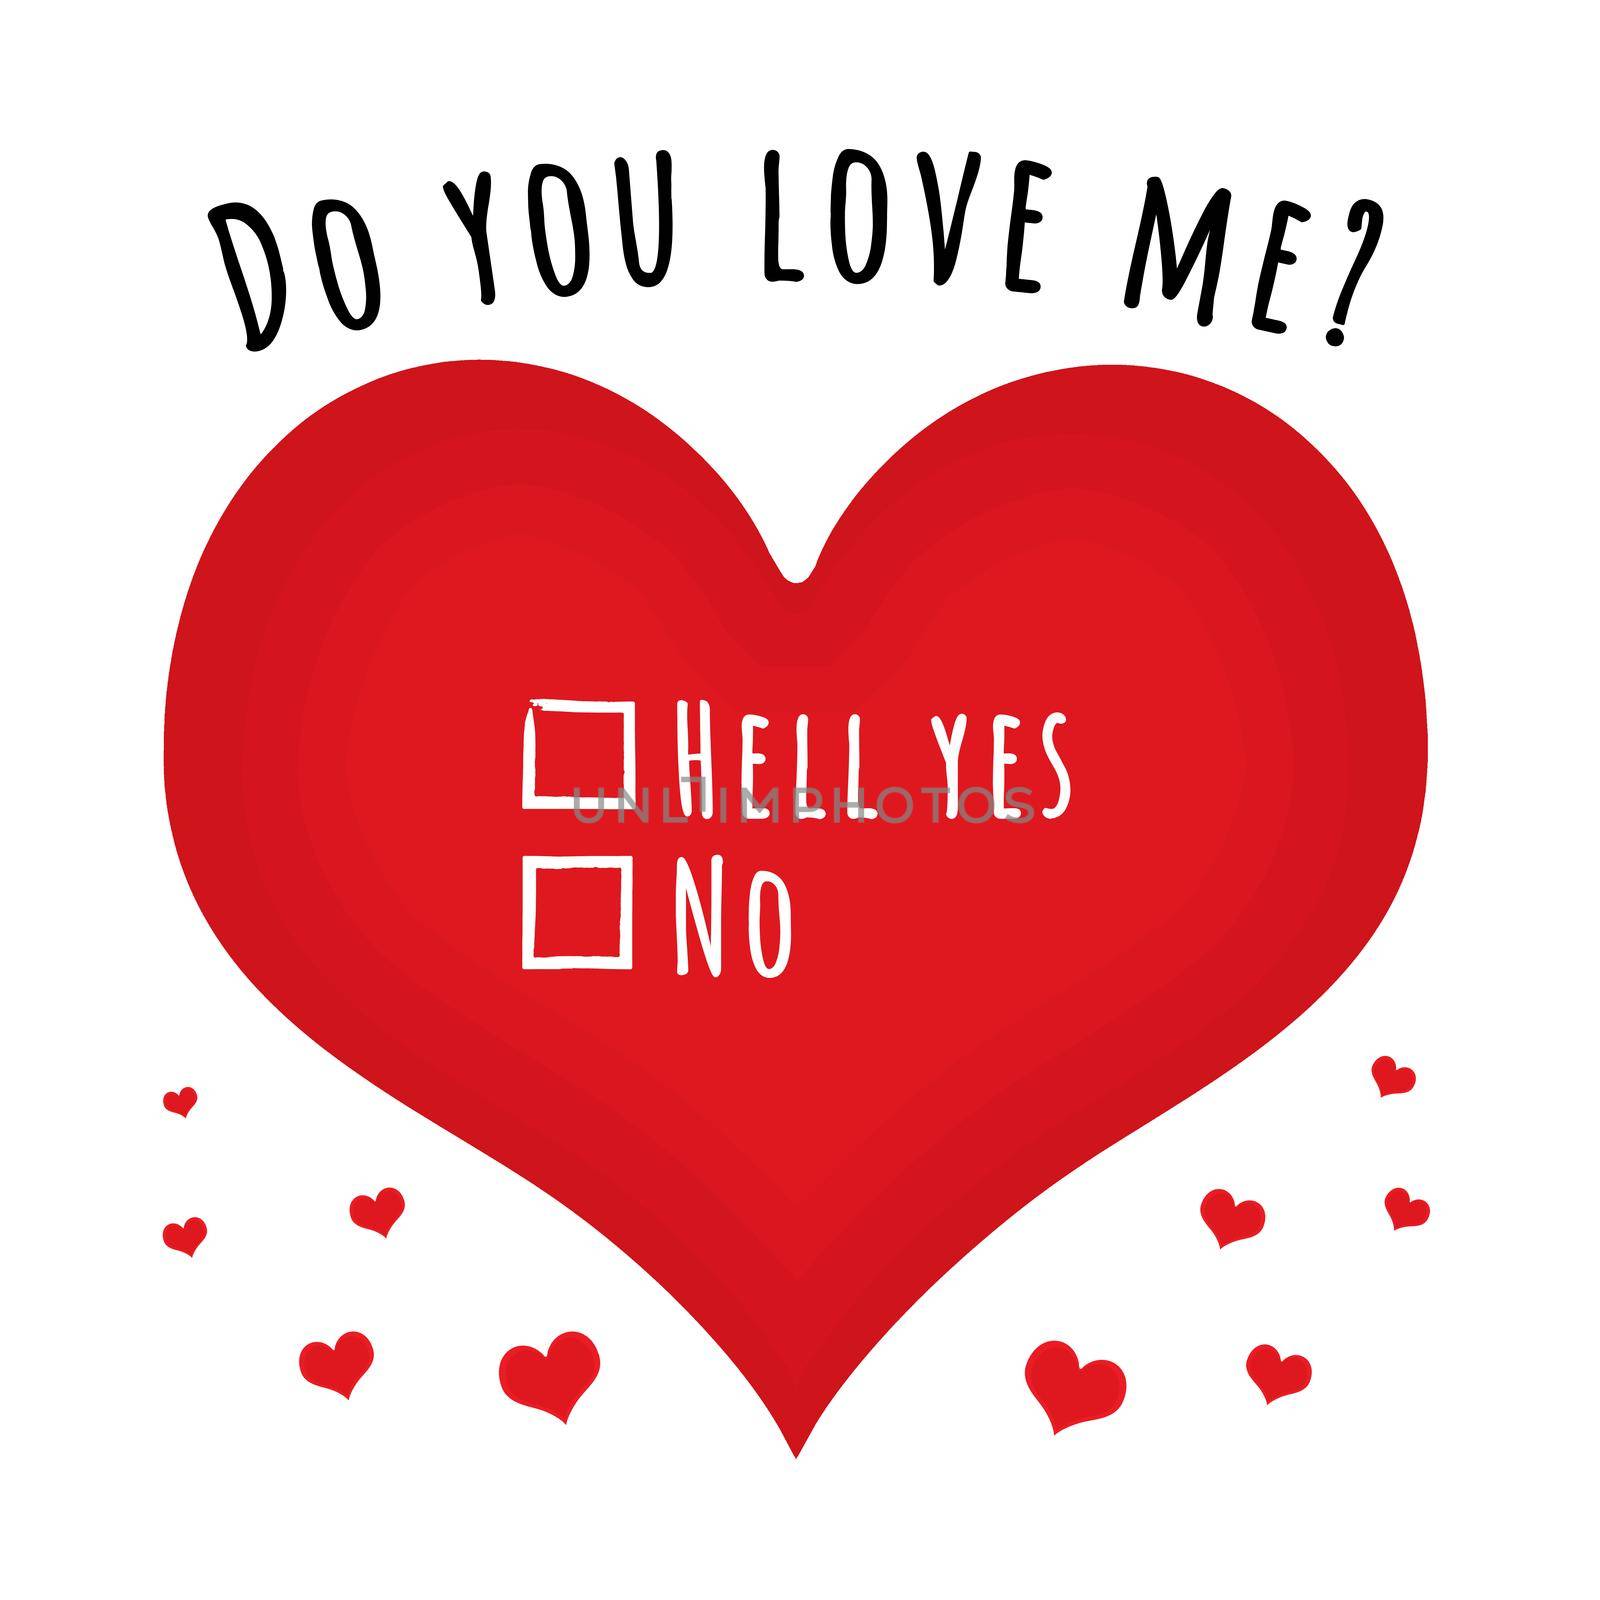 Do you love me hell yes by Bigalbaloo